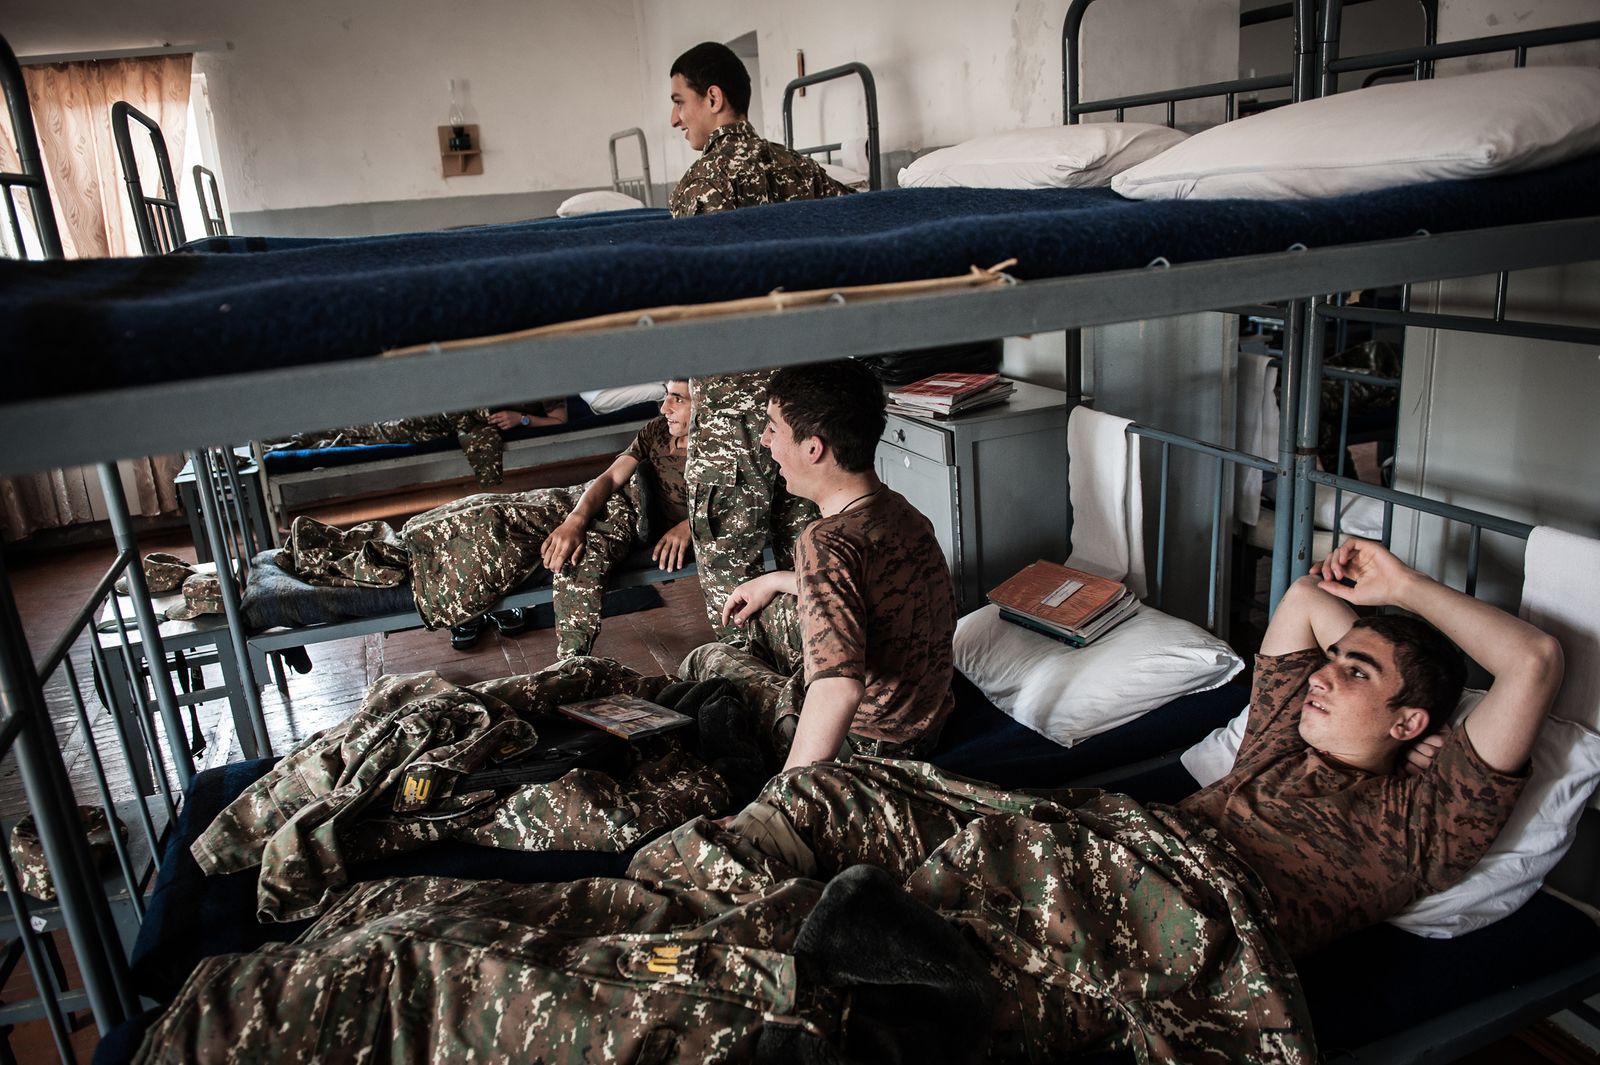 © Mattia Vacca - Young cadets rest in the dorms of the military high-school in Stepanakert.